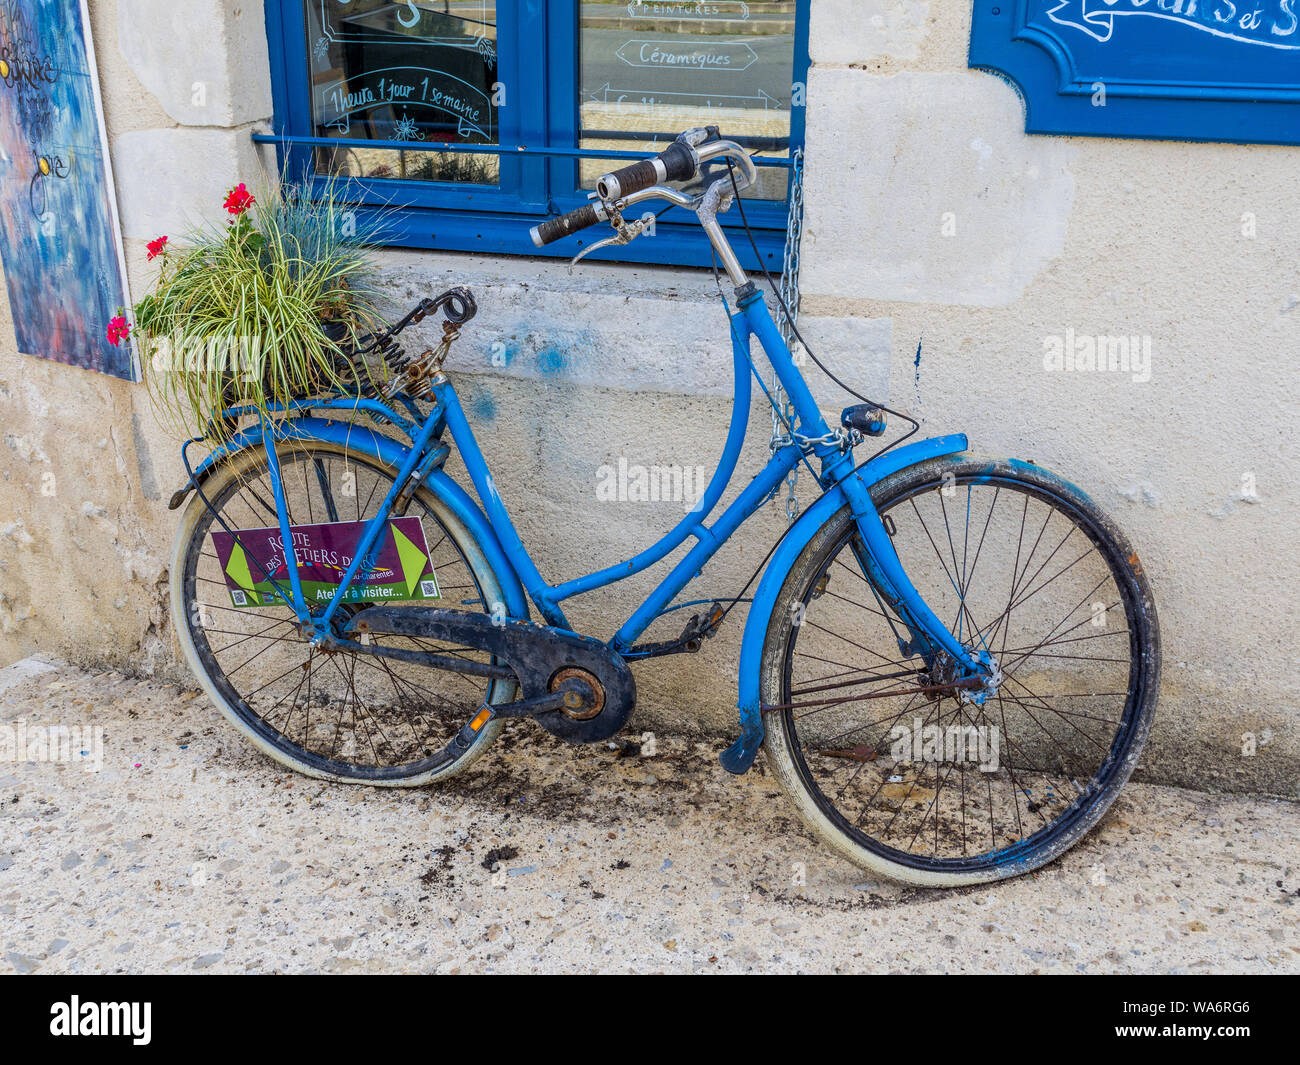 Old bicycle painted blue outside bookshop in 'book city' Montmorillon, Vienne, France. Stock Photo